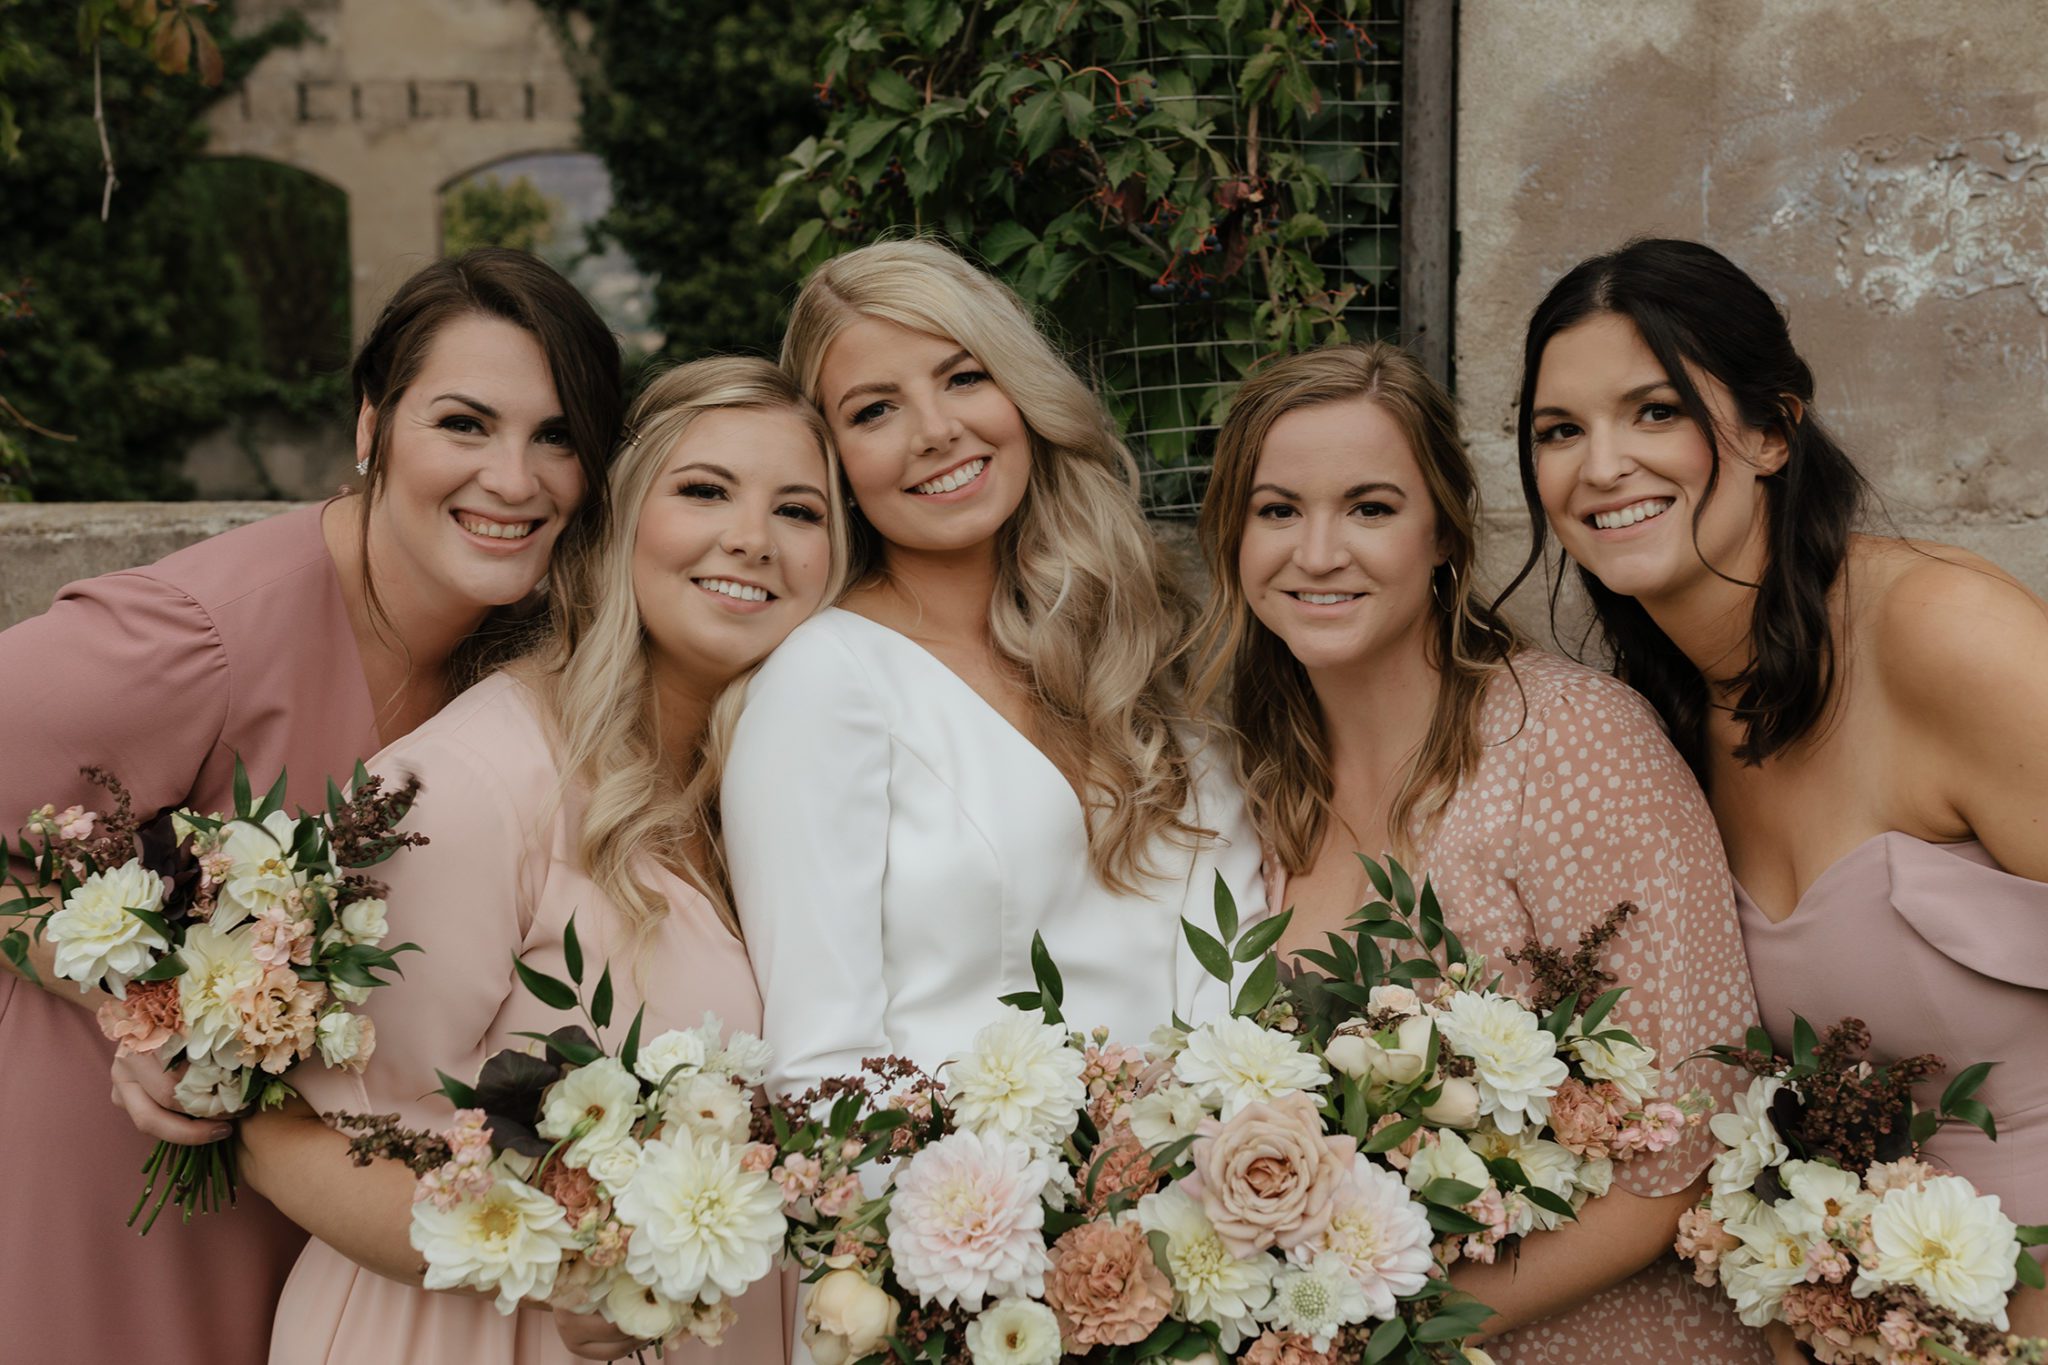 Bridesmaid dress inspiration in blush hues and delicate gown patterns